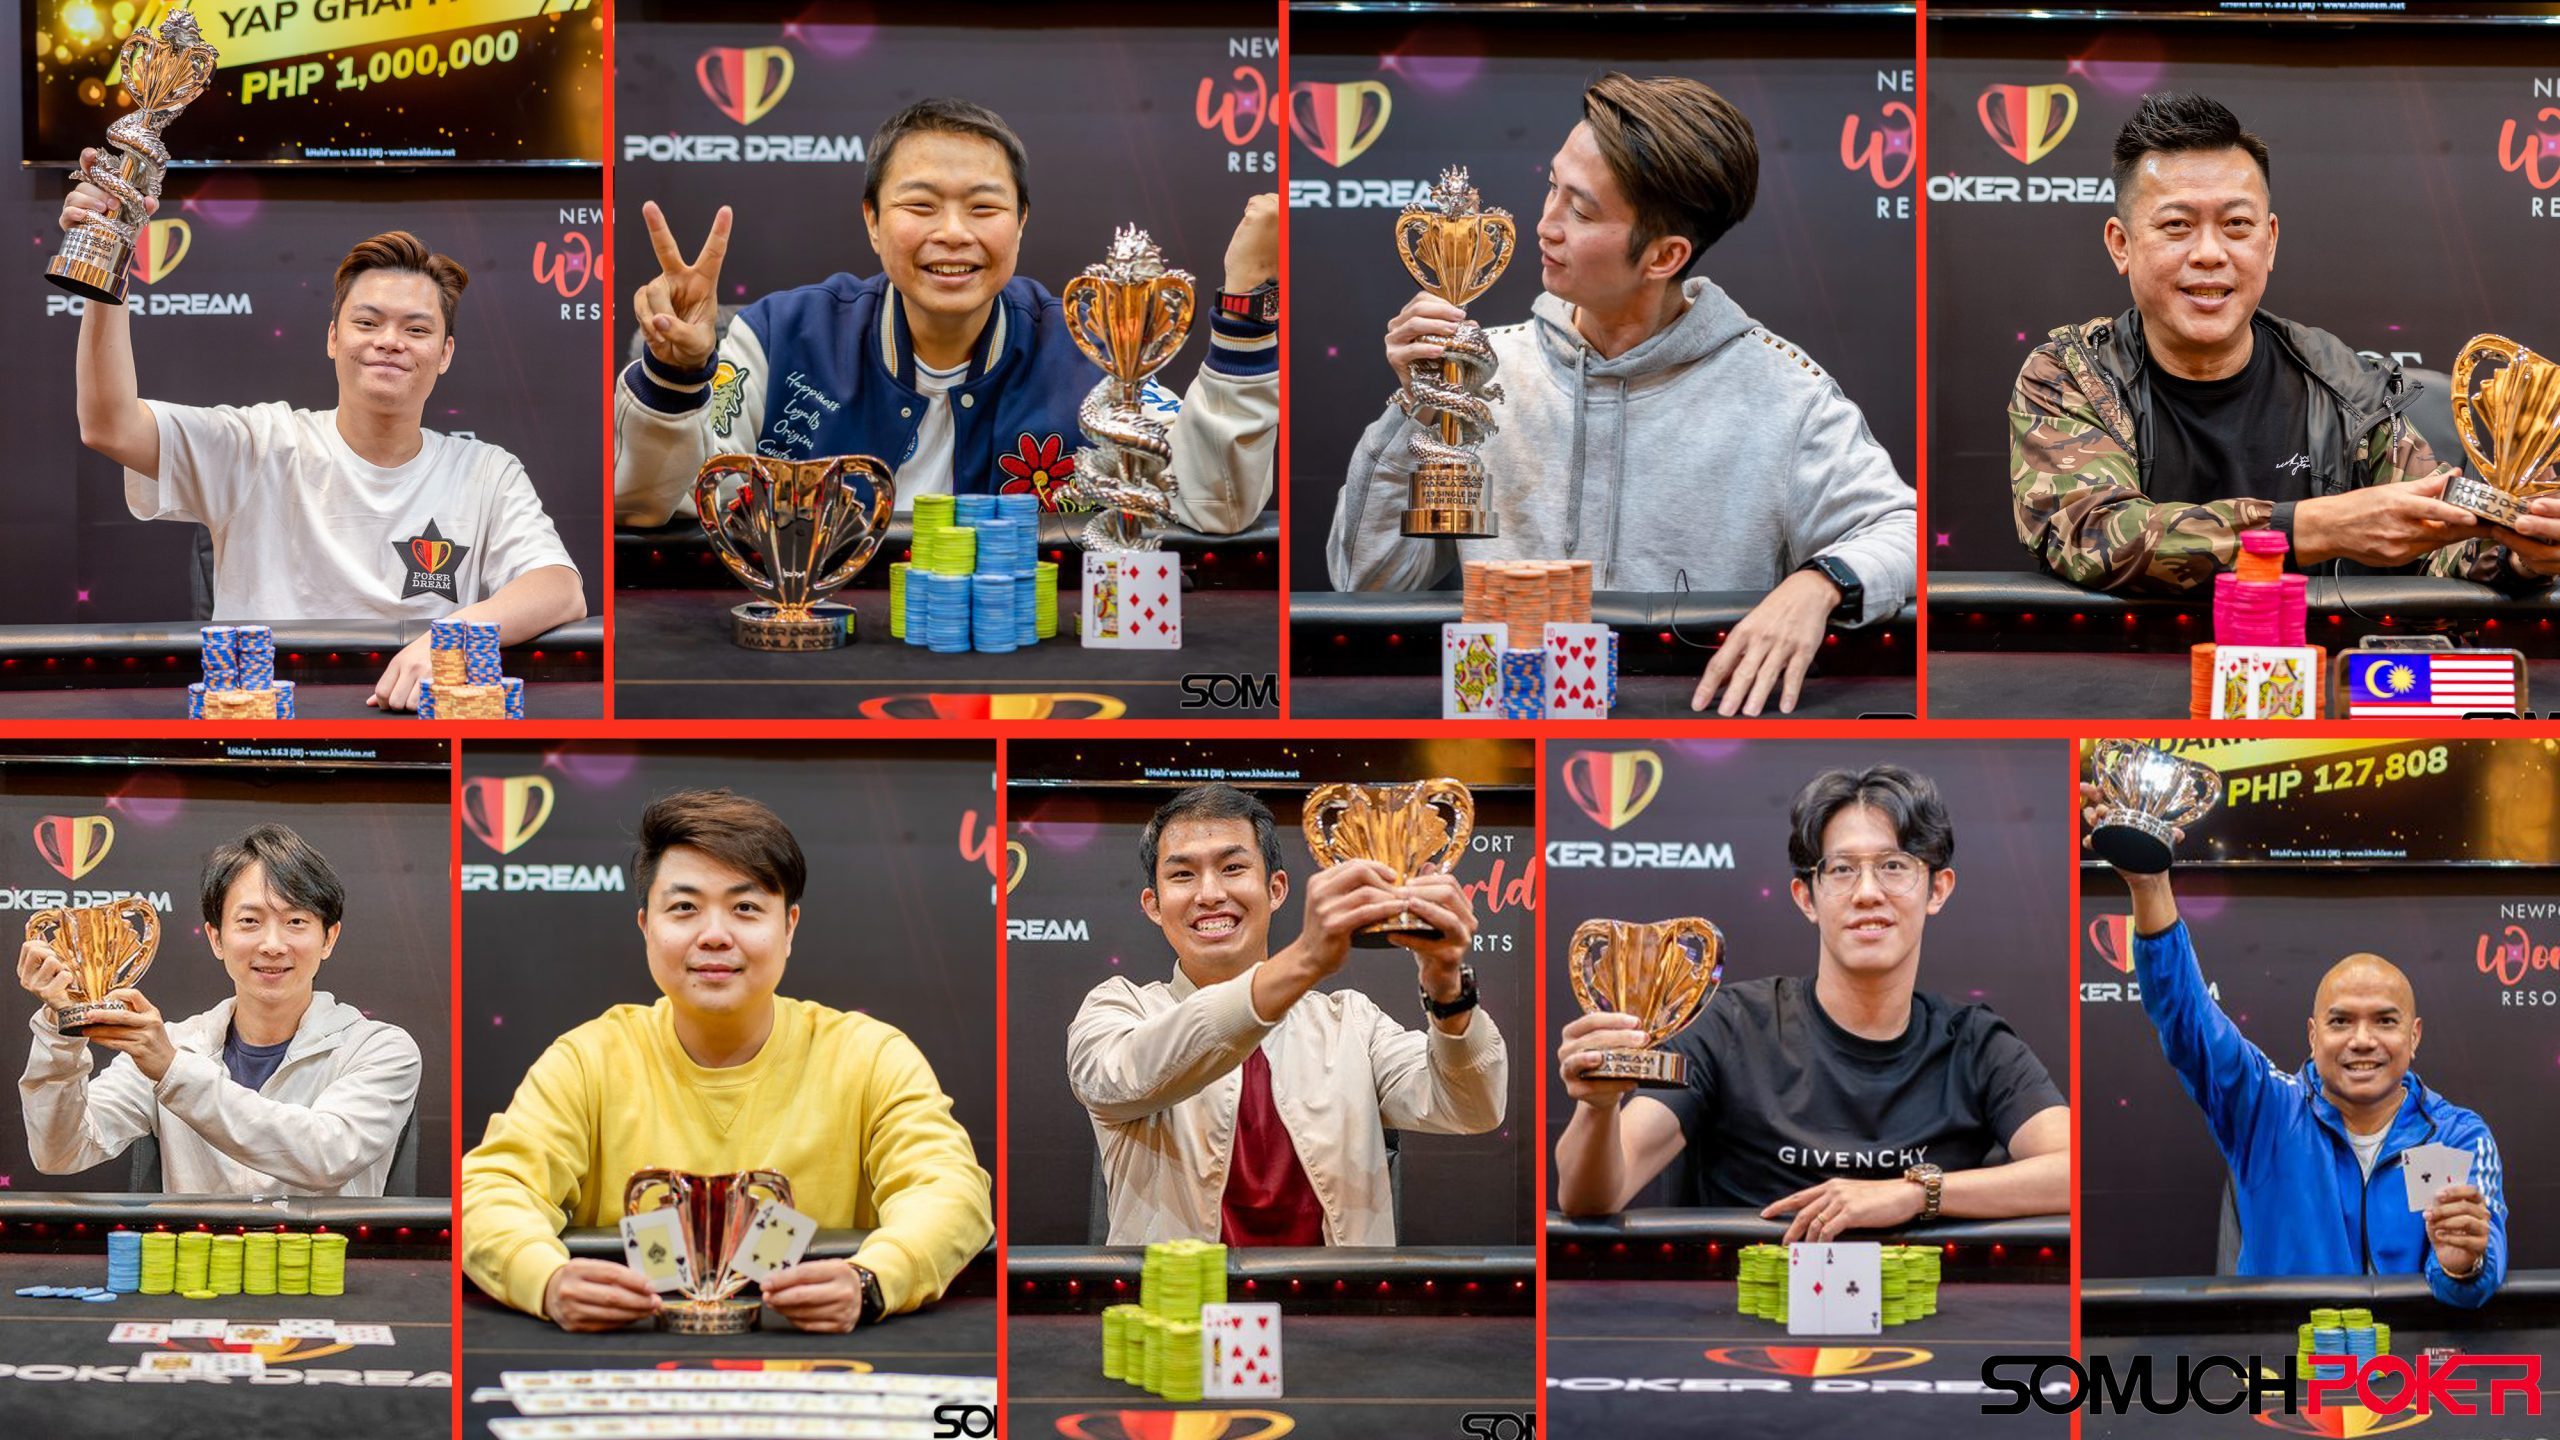 Poker Dream Manila pays out over $3 Million; Malaysia lifts most trophies; Poker Dream Taiwan up next